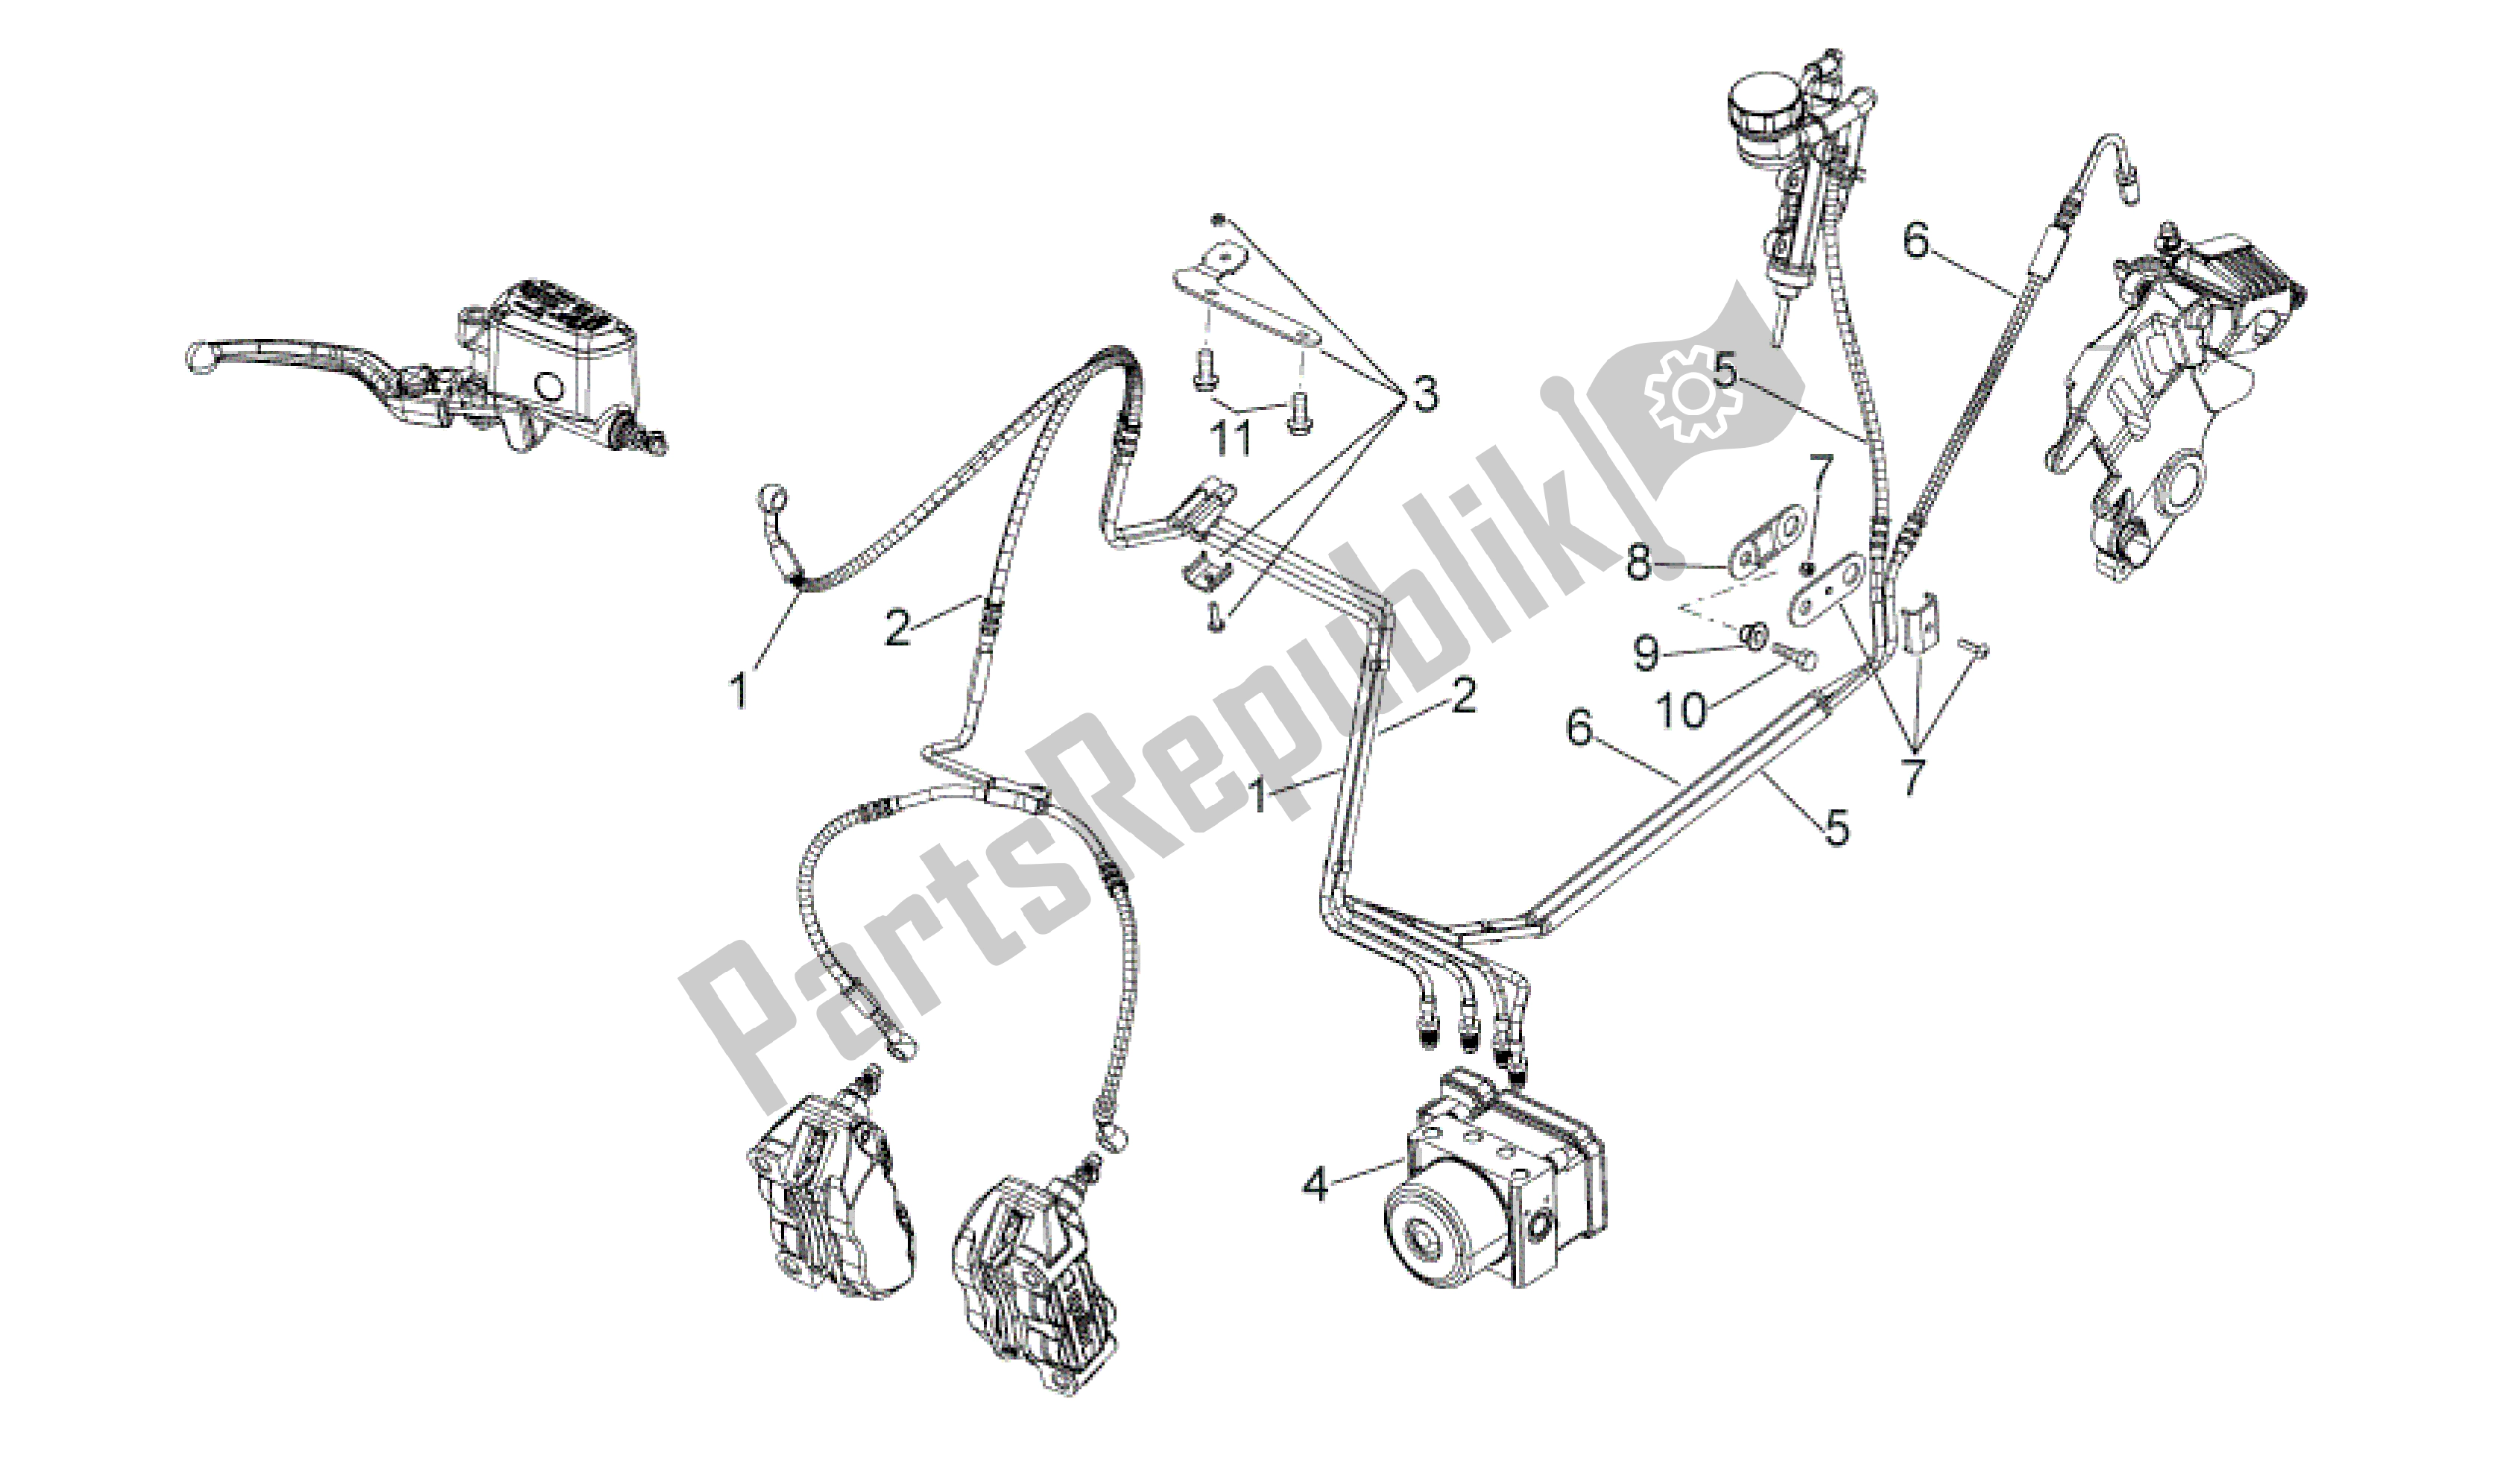 All parts for the Abs Brake System of the Aprilia Shiver 750 2007 - 2009